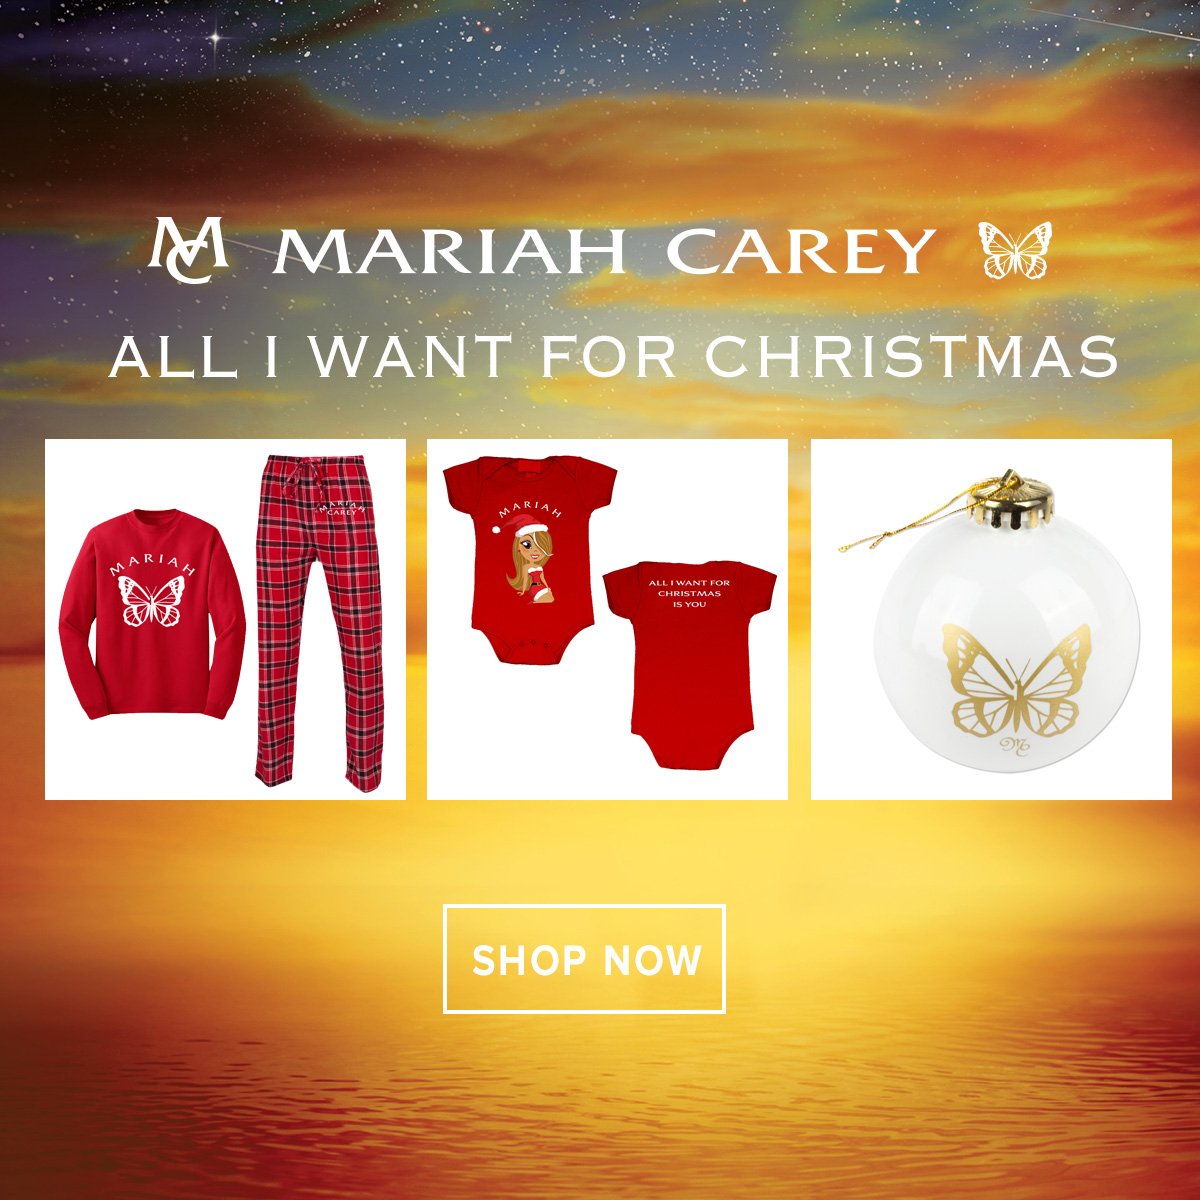 This Black Friday, check out the new Holiday items in the Mariah Carey Store! https://t.co/1dwn1IZWZW #AIWFCIY https://t.co/9zRCq0ginE